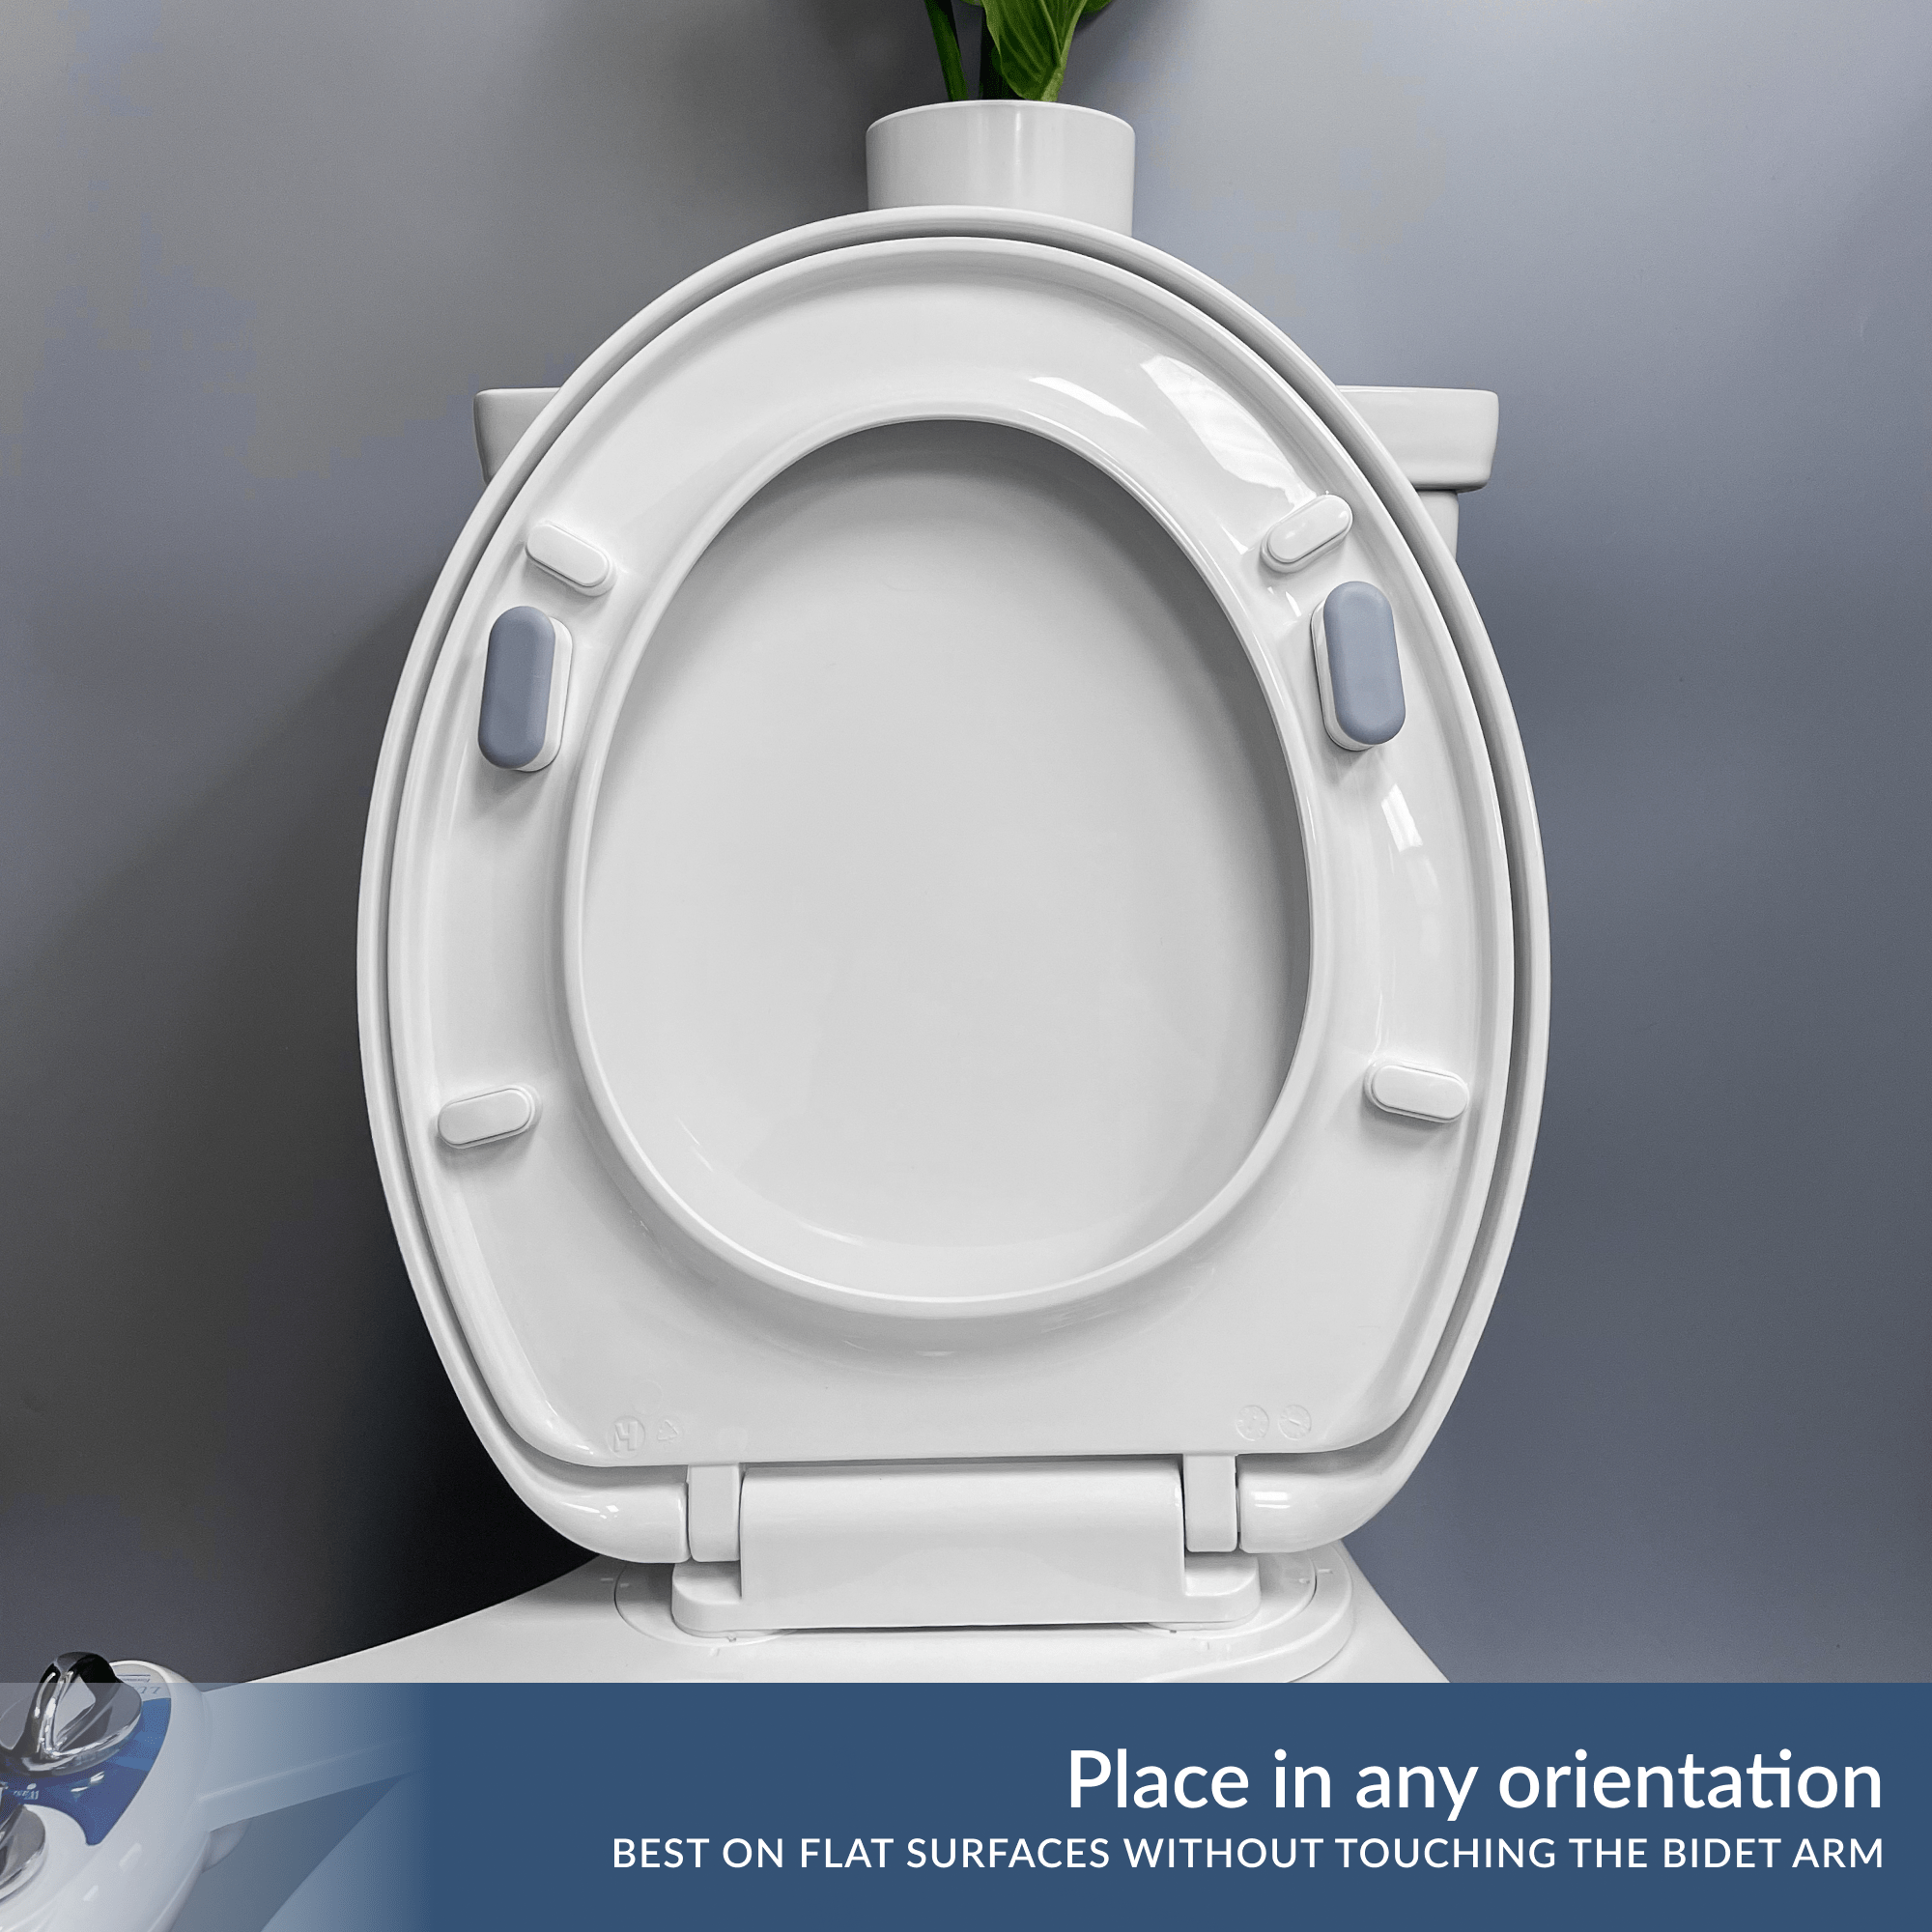 Place in any orientation, best on flat surfaces without touching the bidet arm. Example orientation with two bumpers.